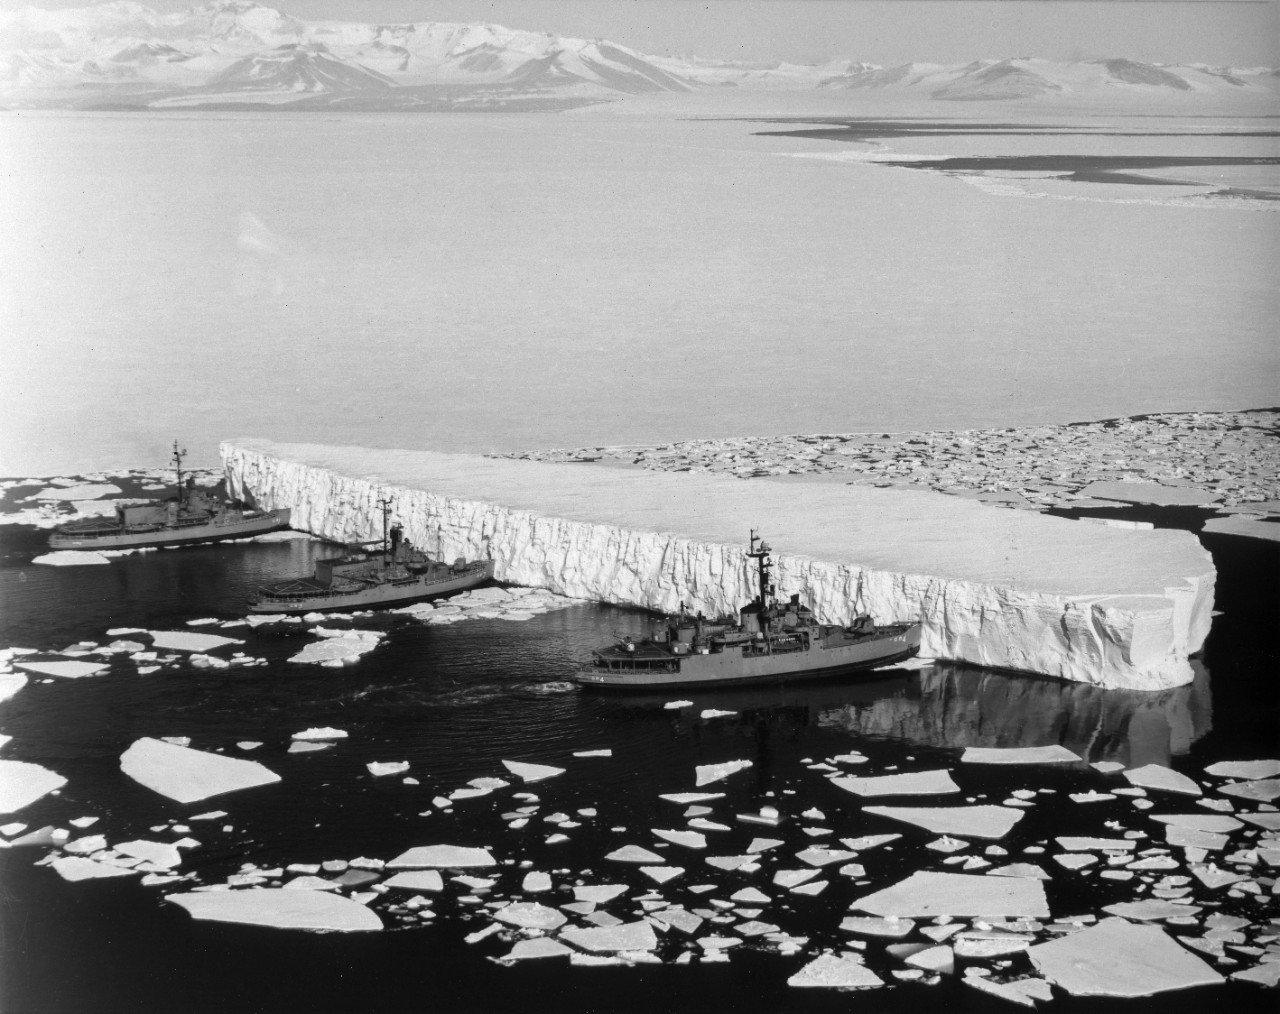 Burton Island, Atka, and Glacier push together to move a huge iceberg from the channel to McMurdo Station, Antarctica, 29 December 1965. (U.S. Navy Photograph USN 827218l, National Archives and Records Administration, Still Pictures Branch, Colle...